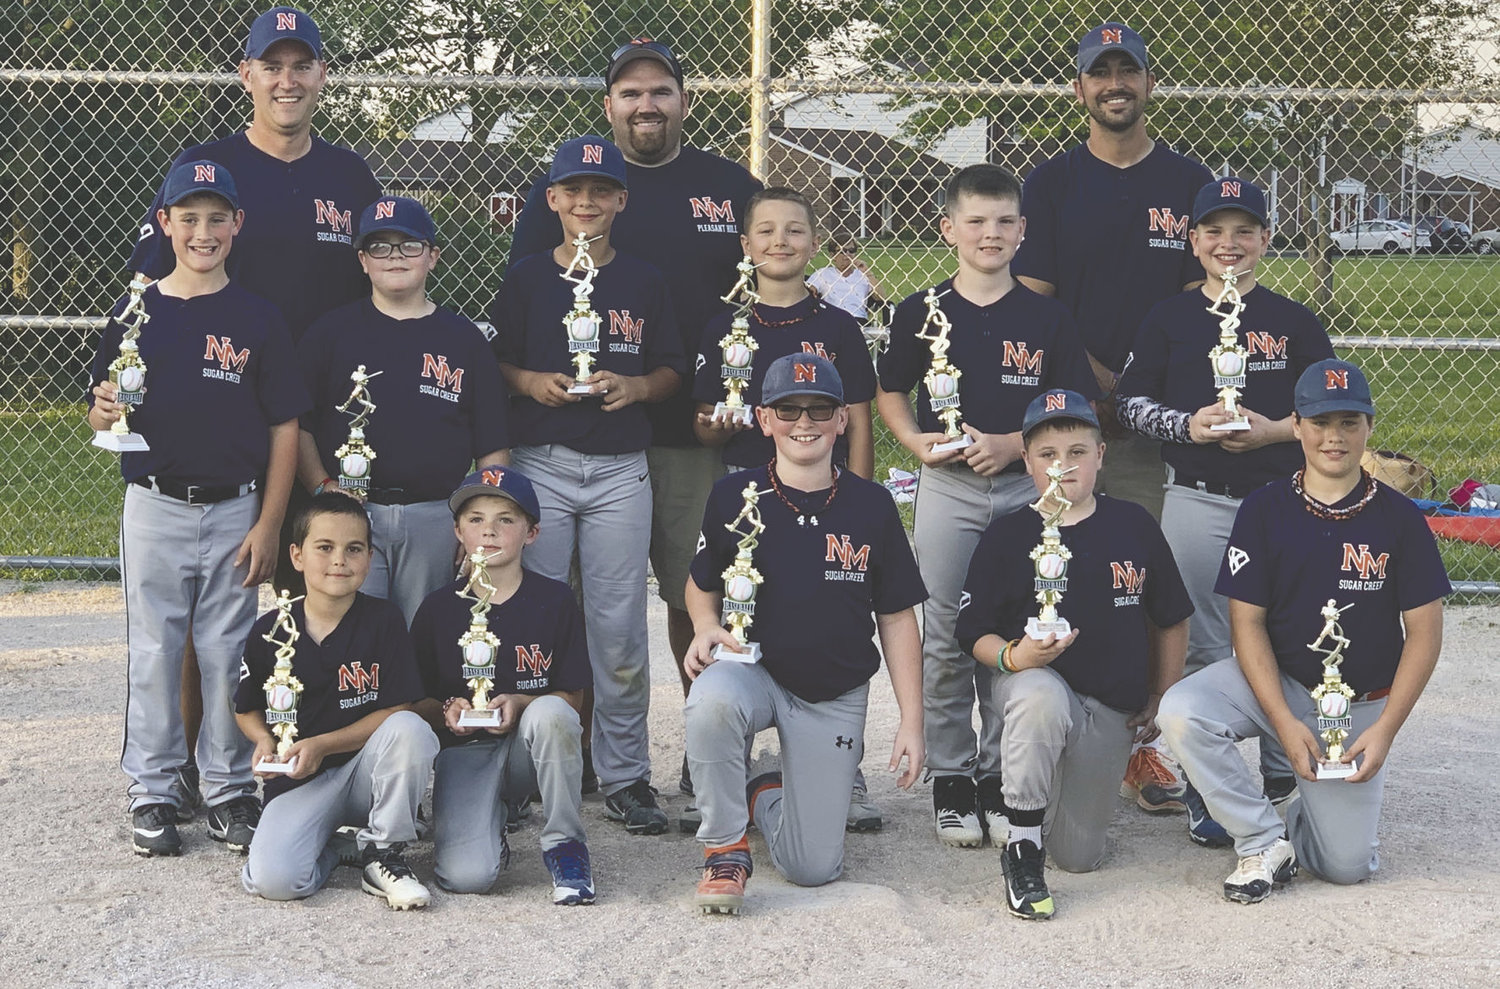 The 10U Sugar Creek team won the county baseball tournament with an 8-6 win over Sommer No. 1 in the championship game. Pictured Below: Back Row L-R: Coach Travis Hess, Sam Harshbarger, and Kyle Thompson. Middle Row L-R: Ryan Hess, Wyatt Harshbarger, Colin Zachary, Carter Thompson, Judaen Walters, and Cayden Keller. Front Row L-R: Lincoln Campbell, Noah Arthur, Brody Roche, Ean Melvin, and Isaiah Hopkins. Not Picutred: Coach Tim Hopkins, Brady Jones and Hunter Brock.